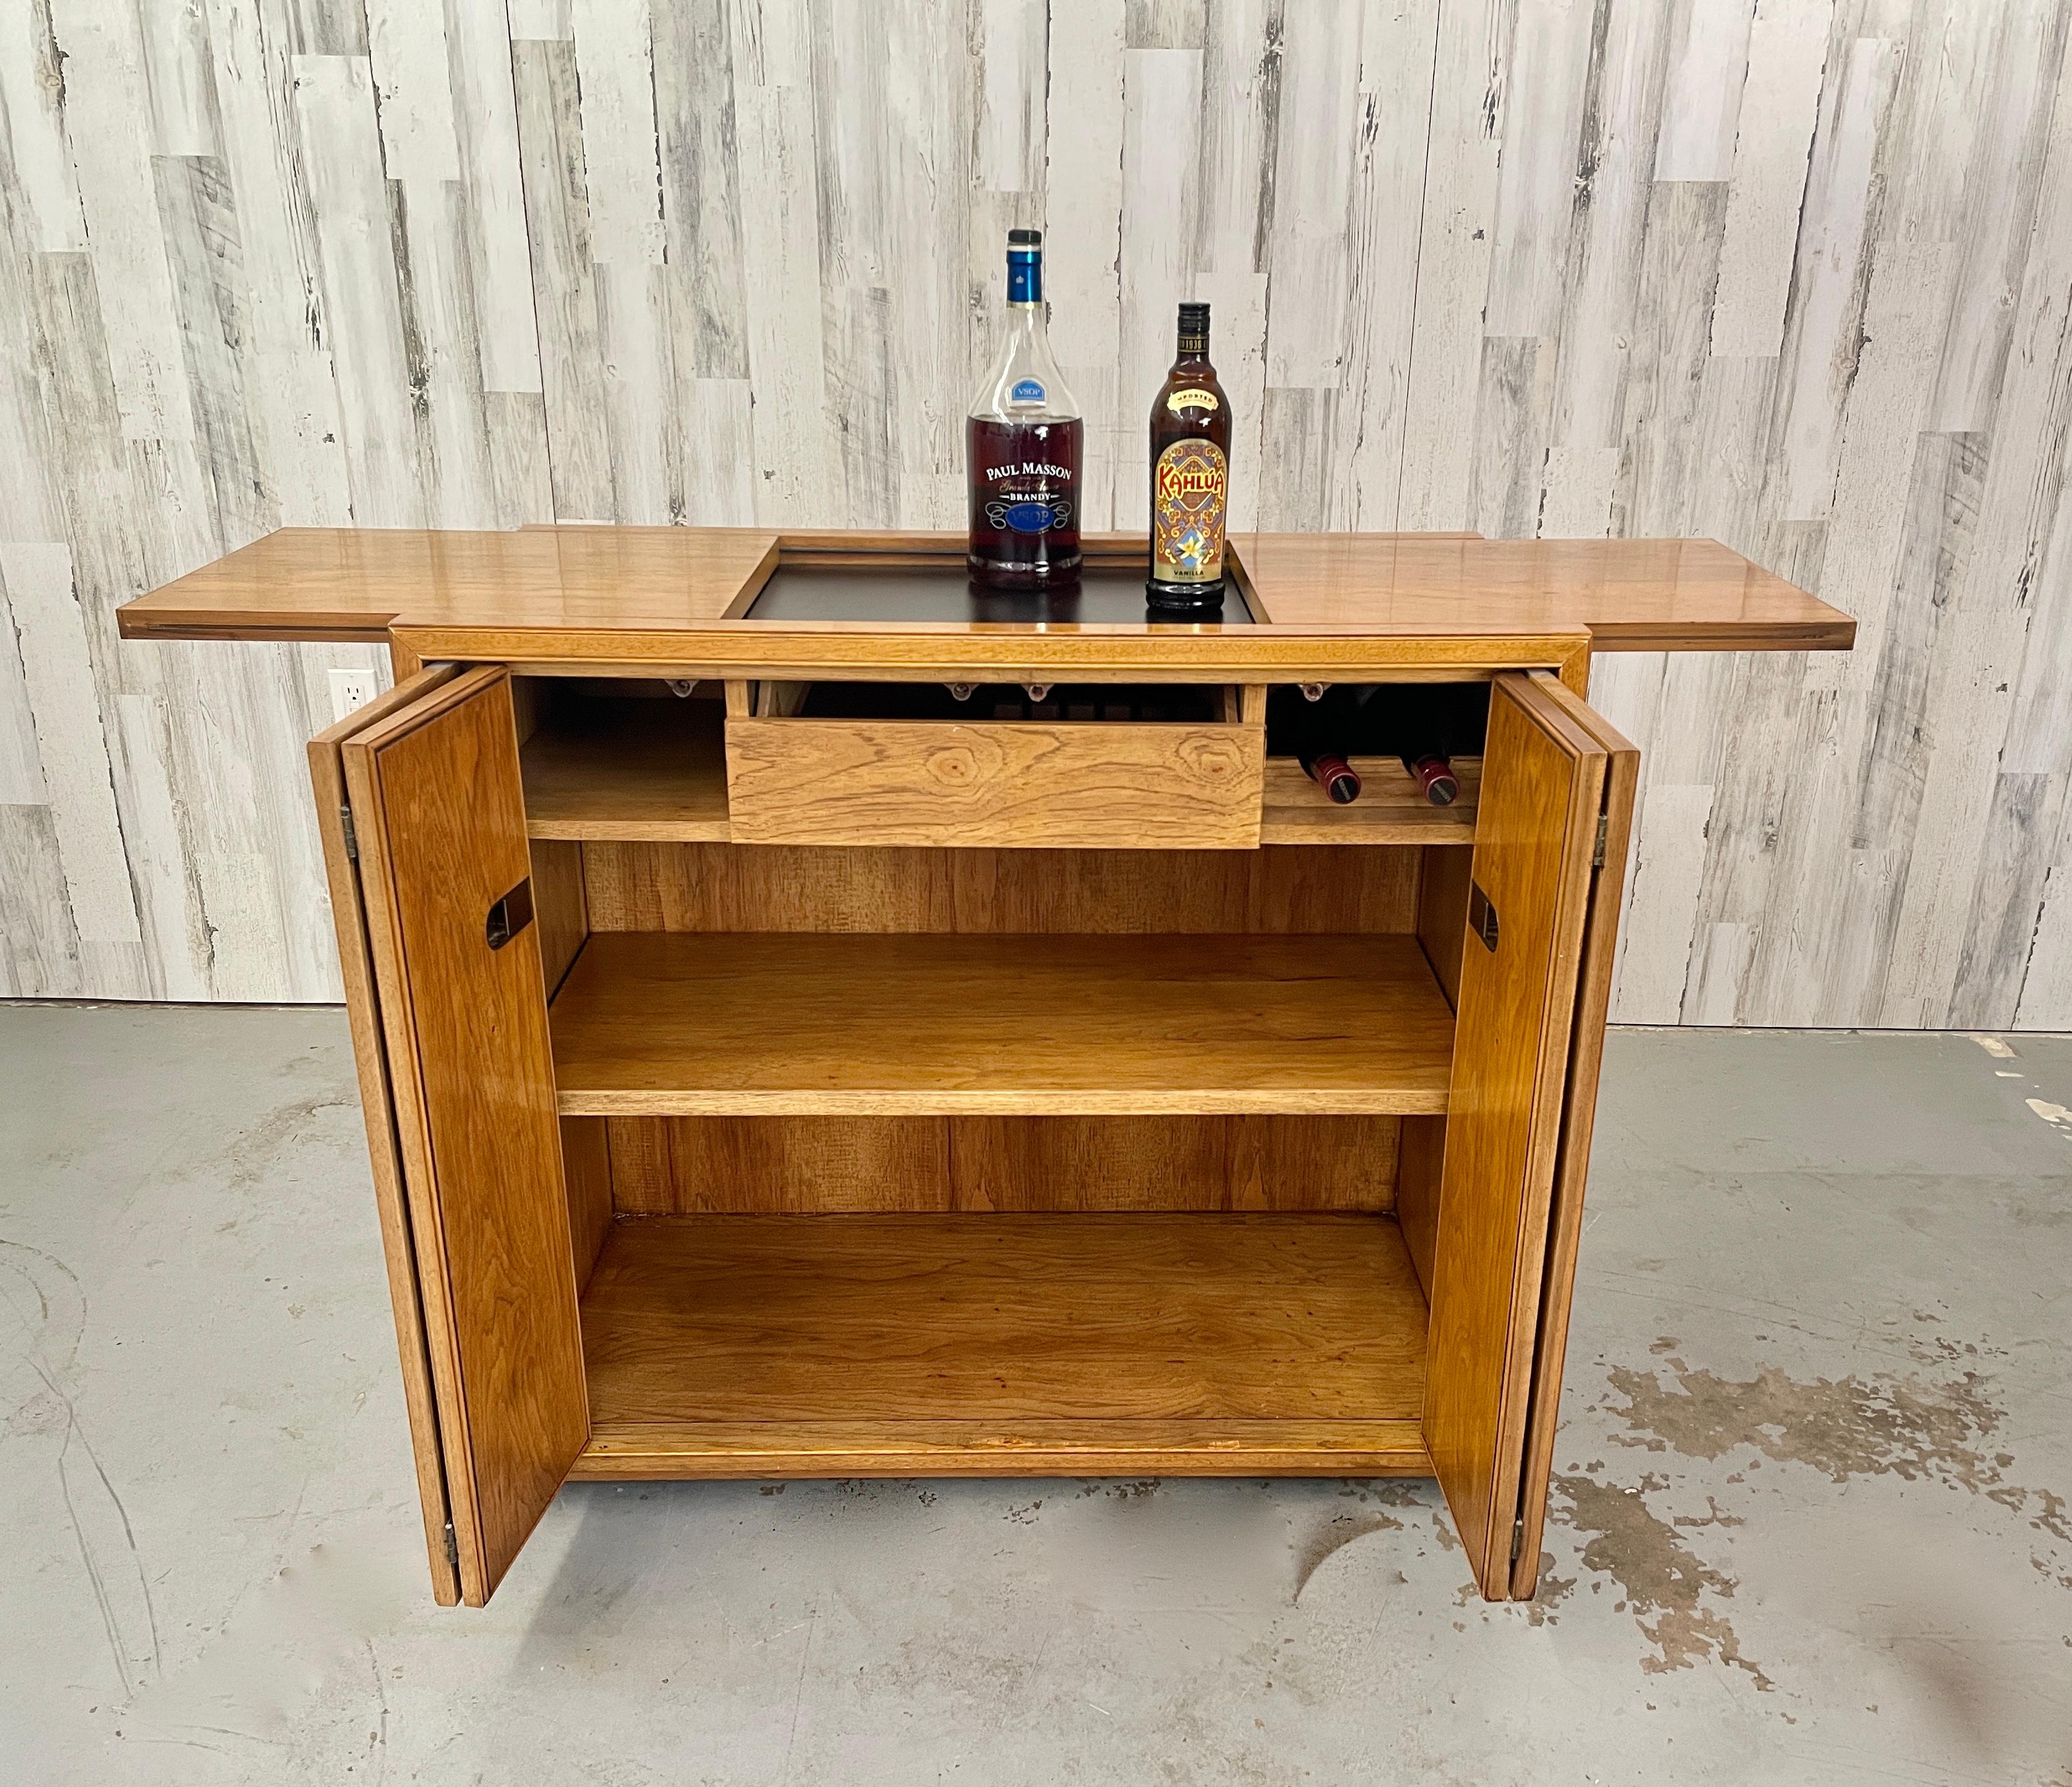 Drexel Extendable Top Liquor Cabinet In Good Condition For Sale In Denton, TX